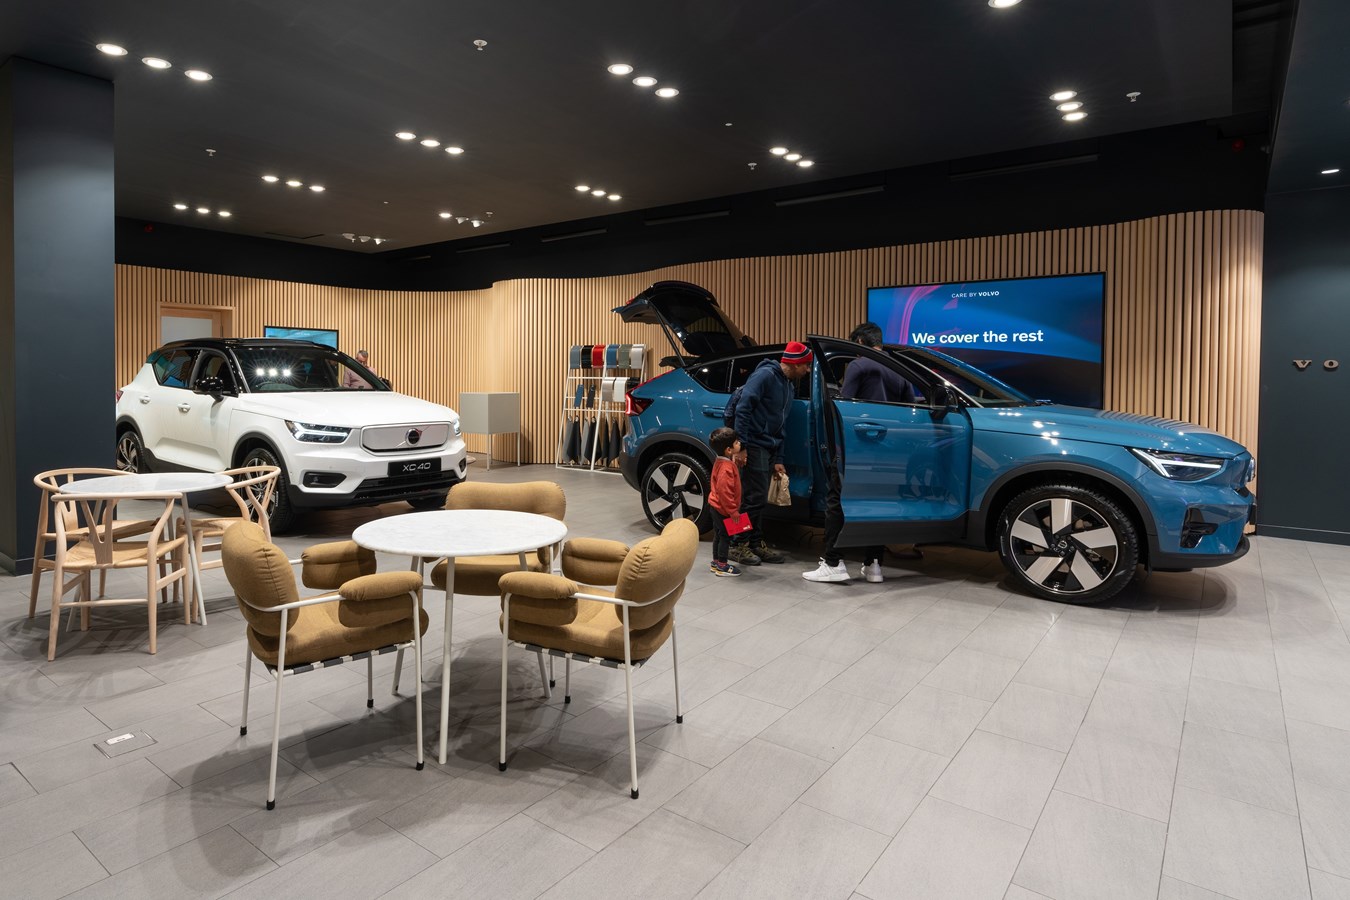 New Volvo Studio opens to showcase electric cars at Brent Cross